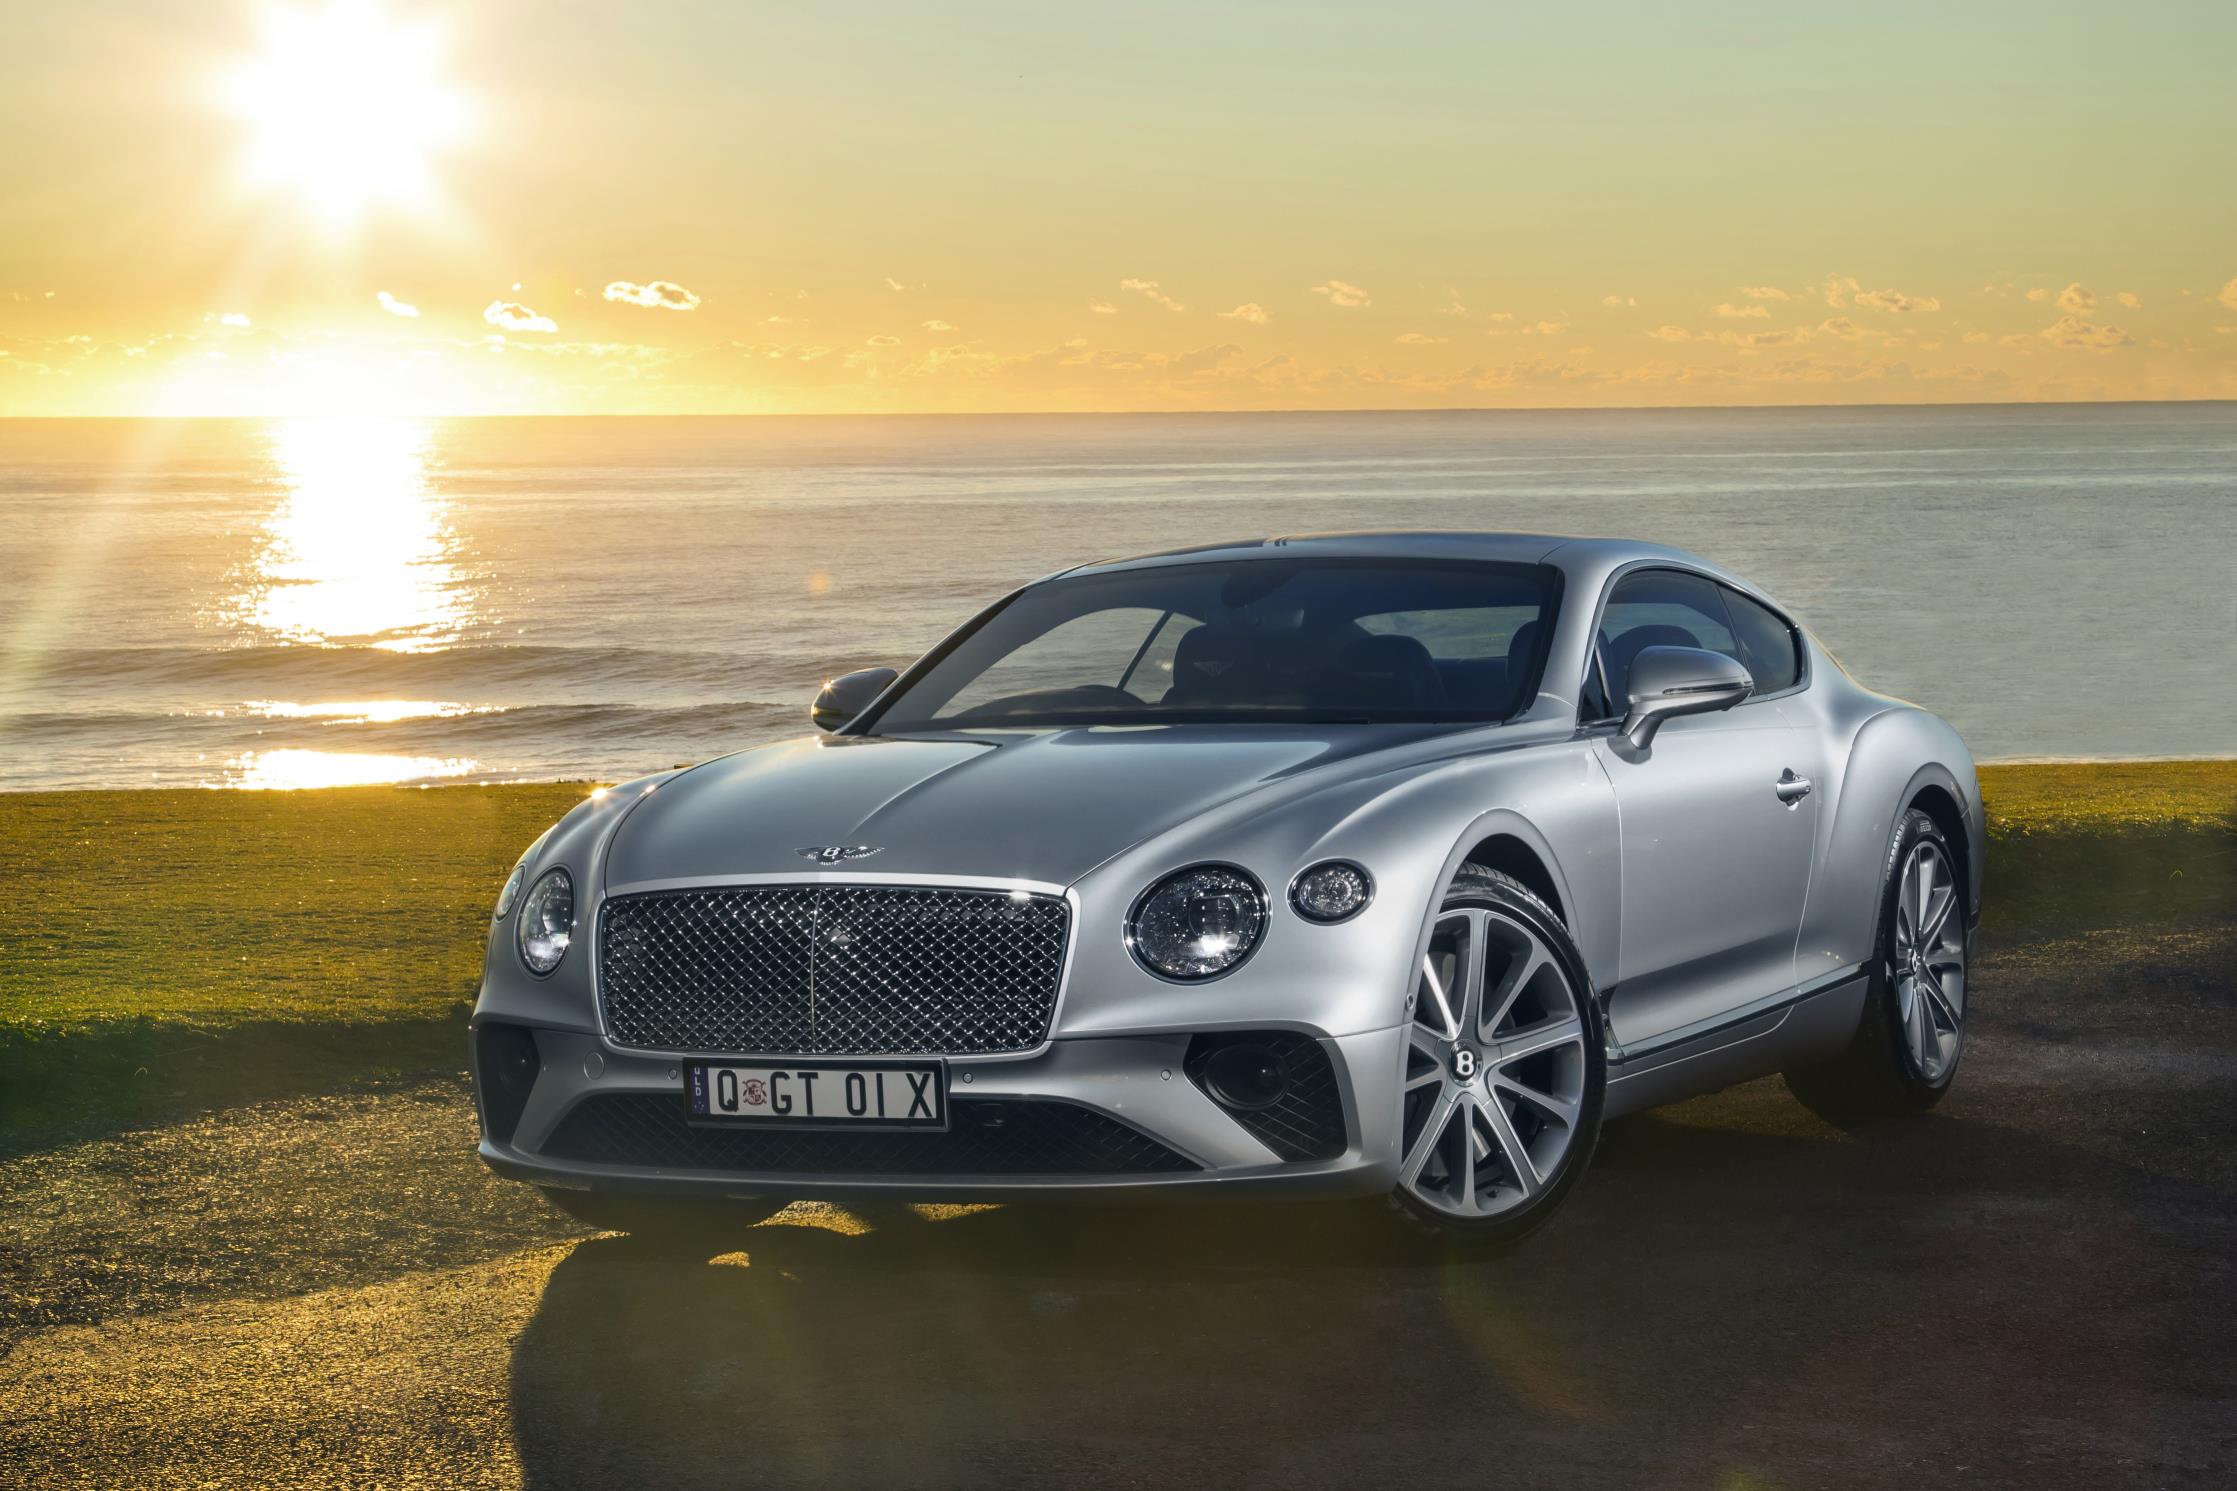 THE BENTLEY CONTINENTAL GT HAS ARRIVED - THE DEFINITION OF LUXURY GRAND ...